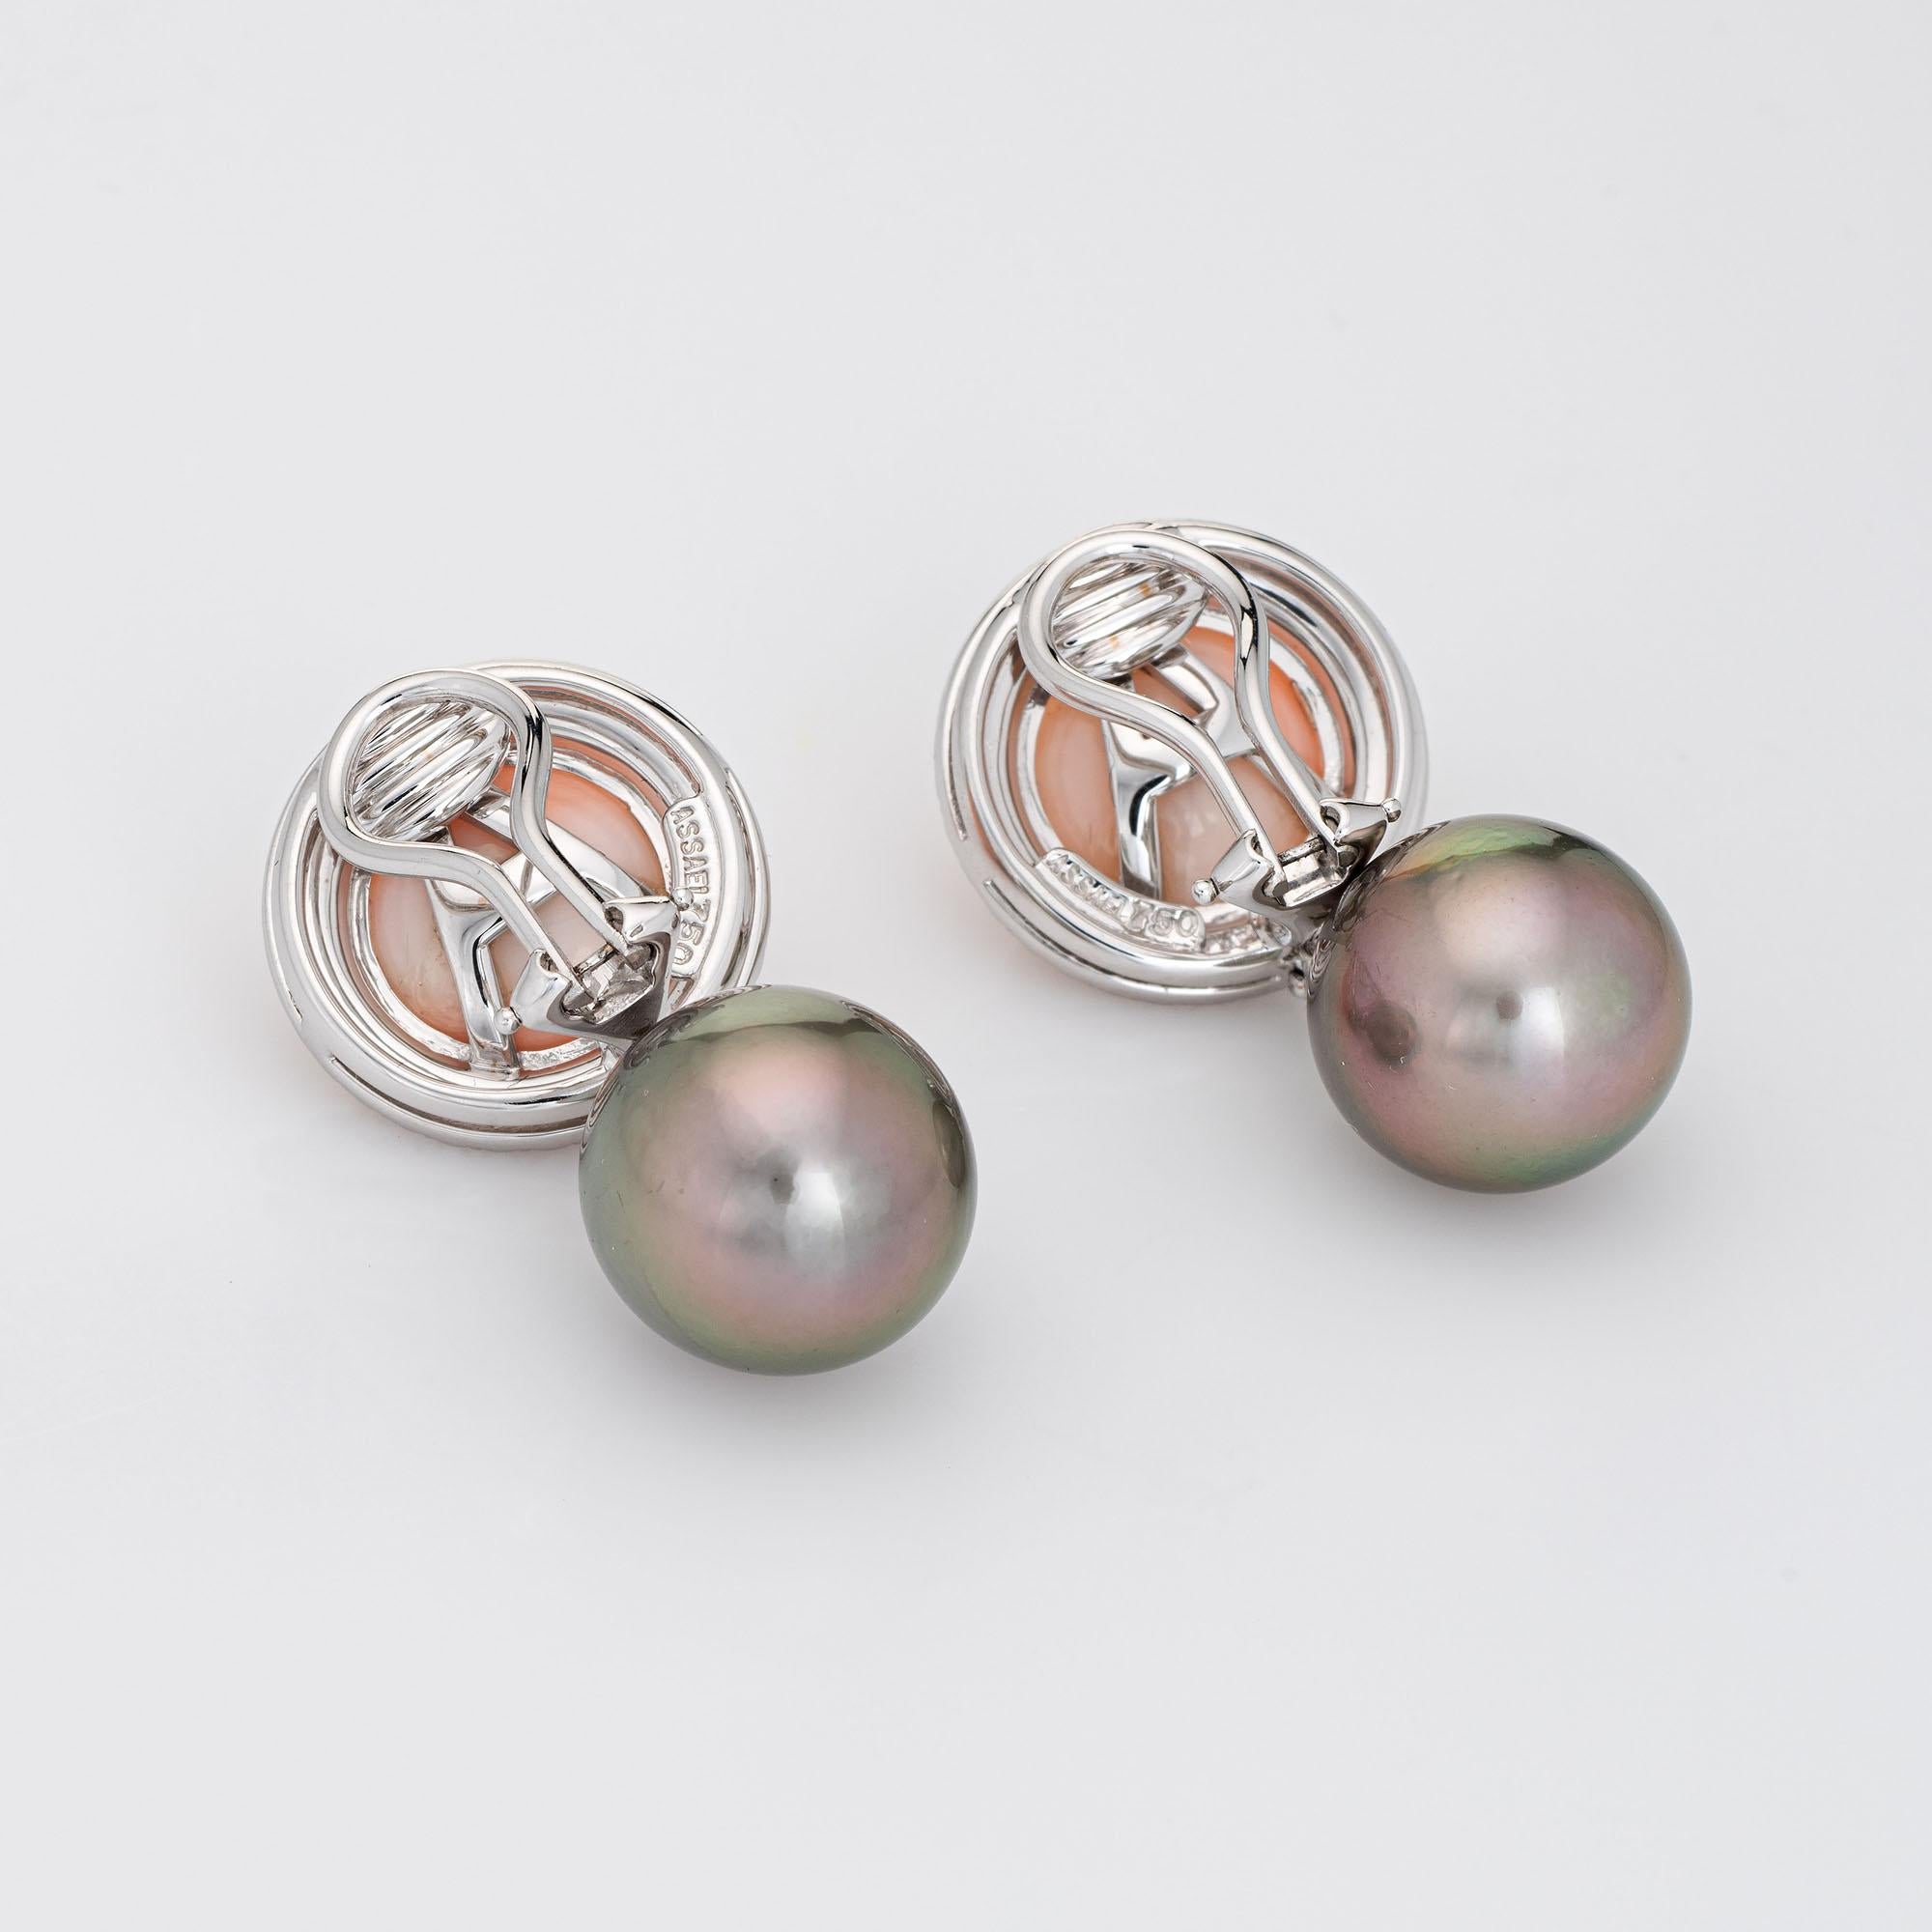 Elegant pair of estate Assael angel skin coral, diamond & Tahitian South Sea pearl earrings crafted in 18k white gold. 

Round brilliant cut diamonds total an estimated 1.25 carats (estimated at F-G color and VVS2 clarity). The coral measures 11mm x